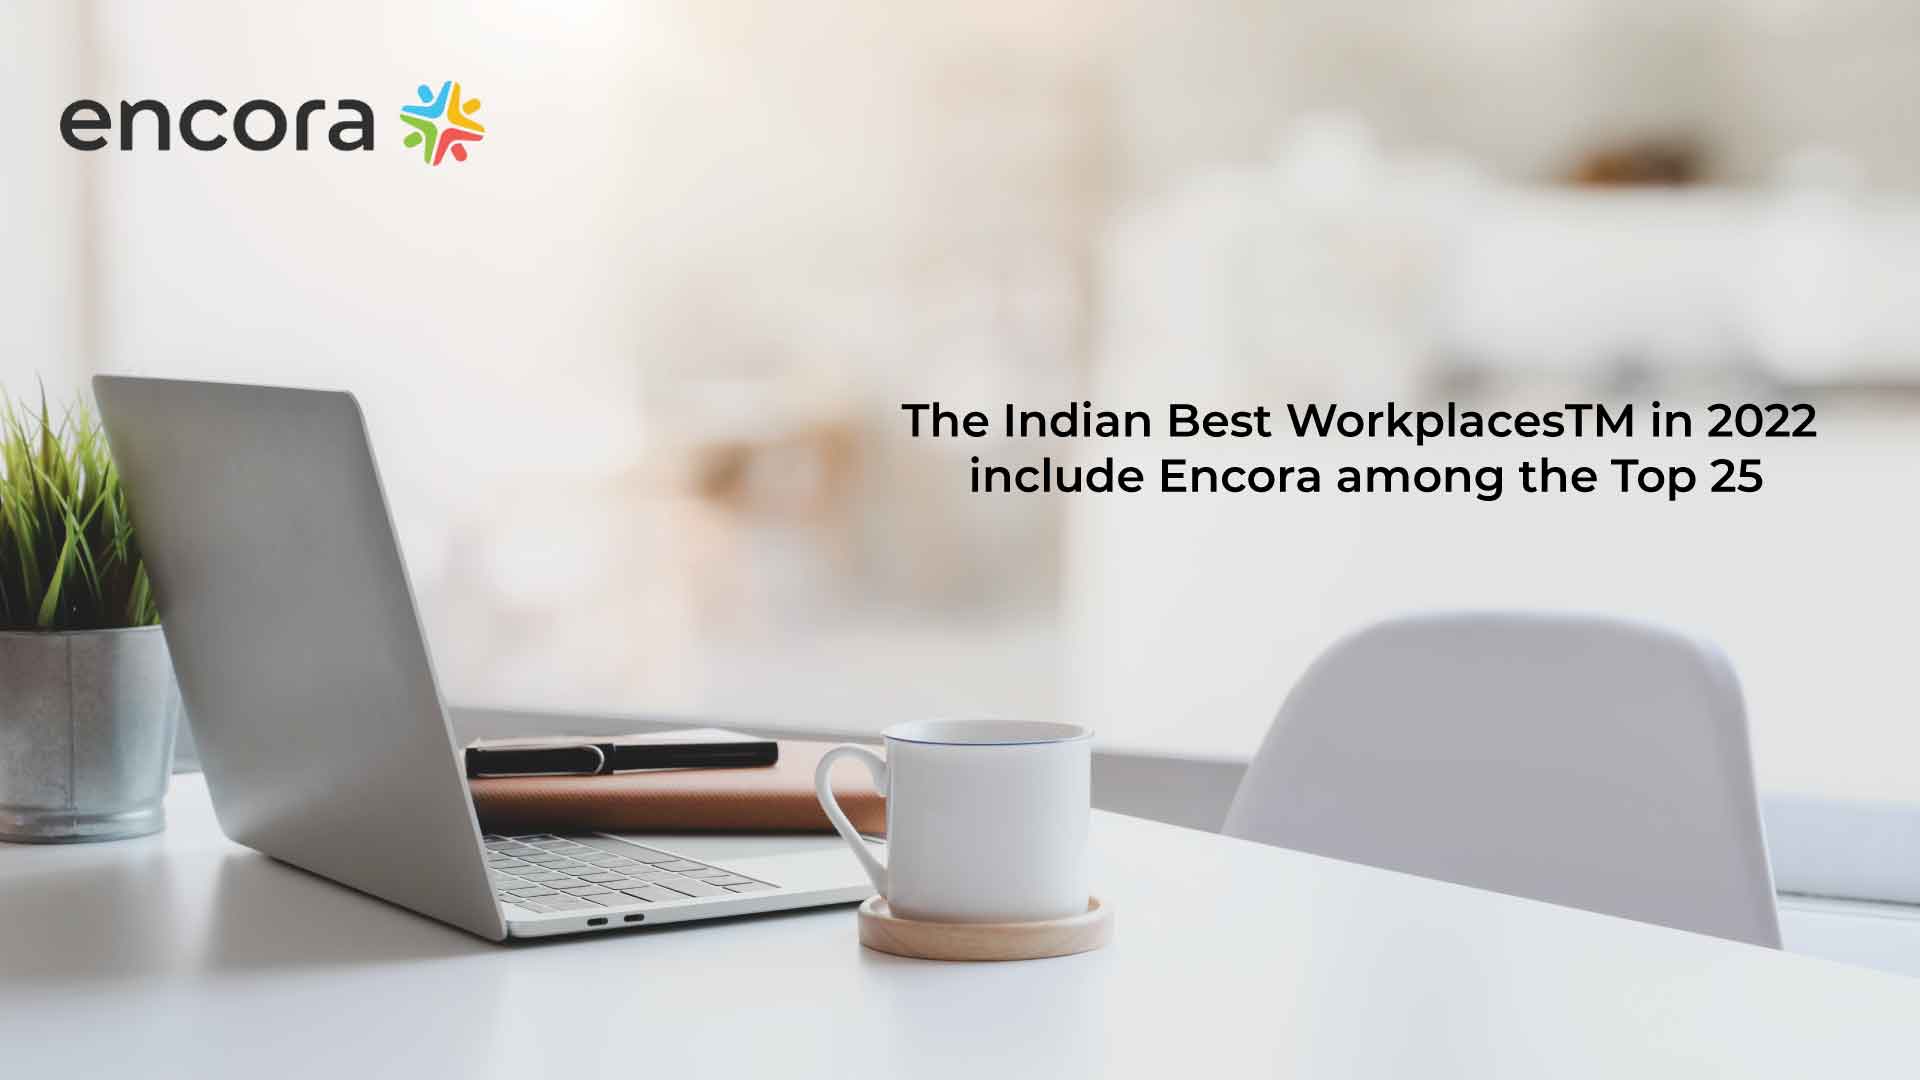 Encora Ranks among the Top 25 in 2022 India's Best Workplaces™ in IT & IT-Business Process Management